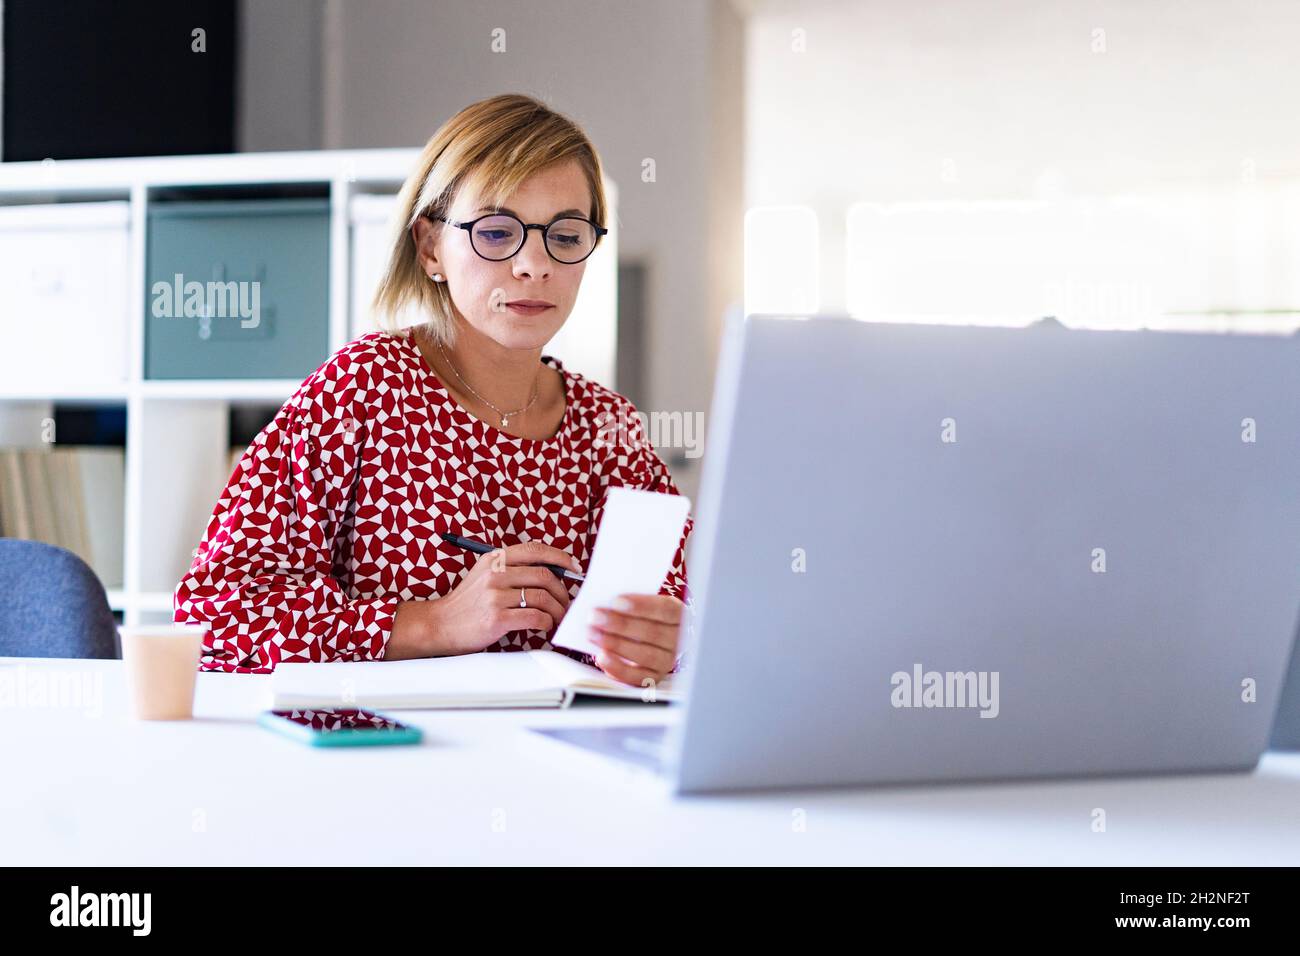 Thoughtful female professional looking at laptop in office Stock Photo